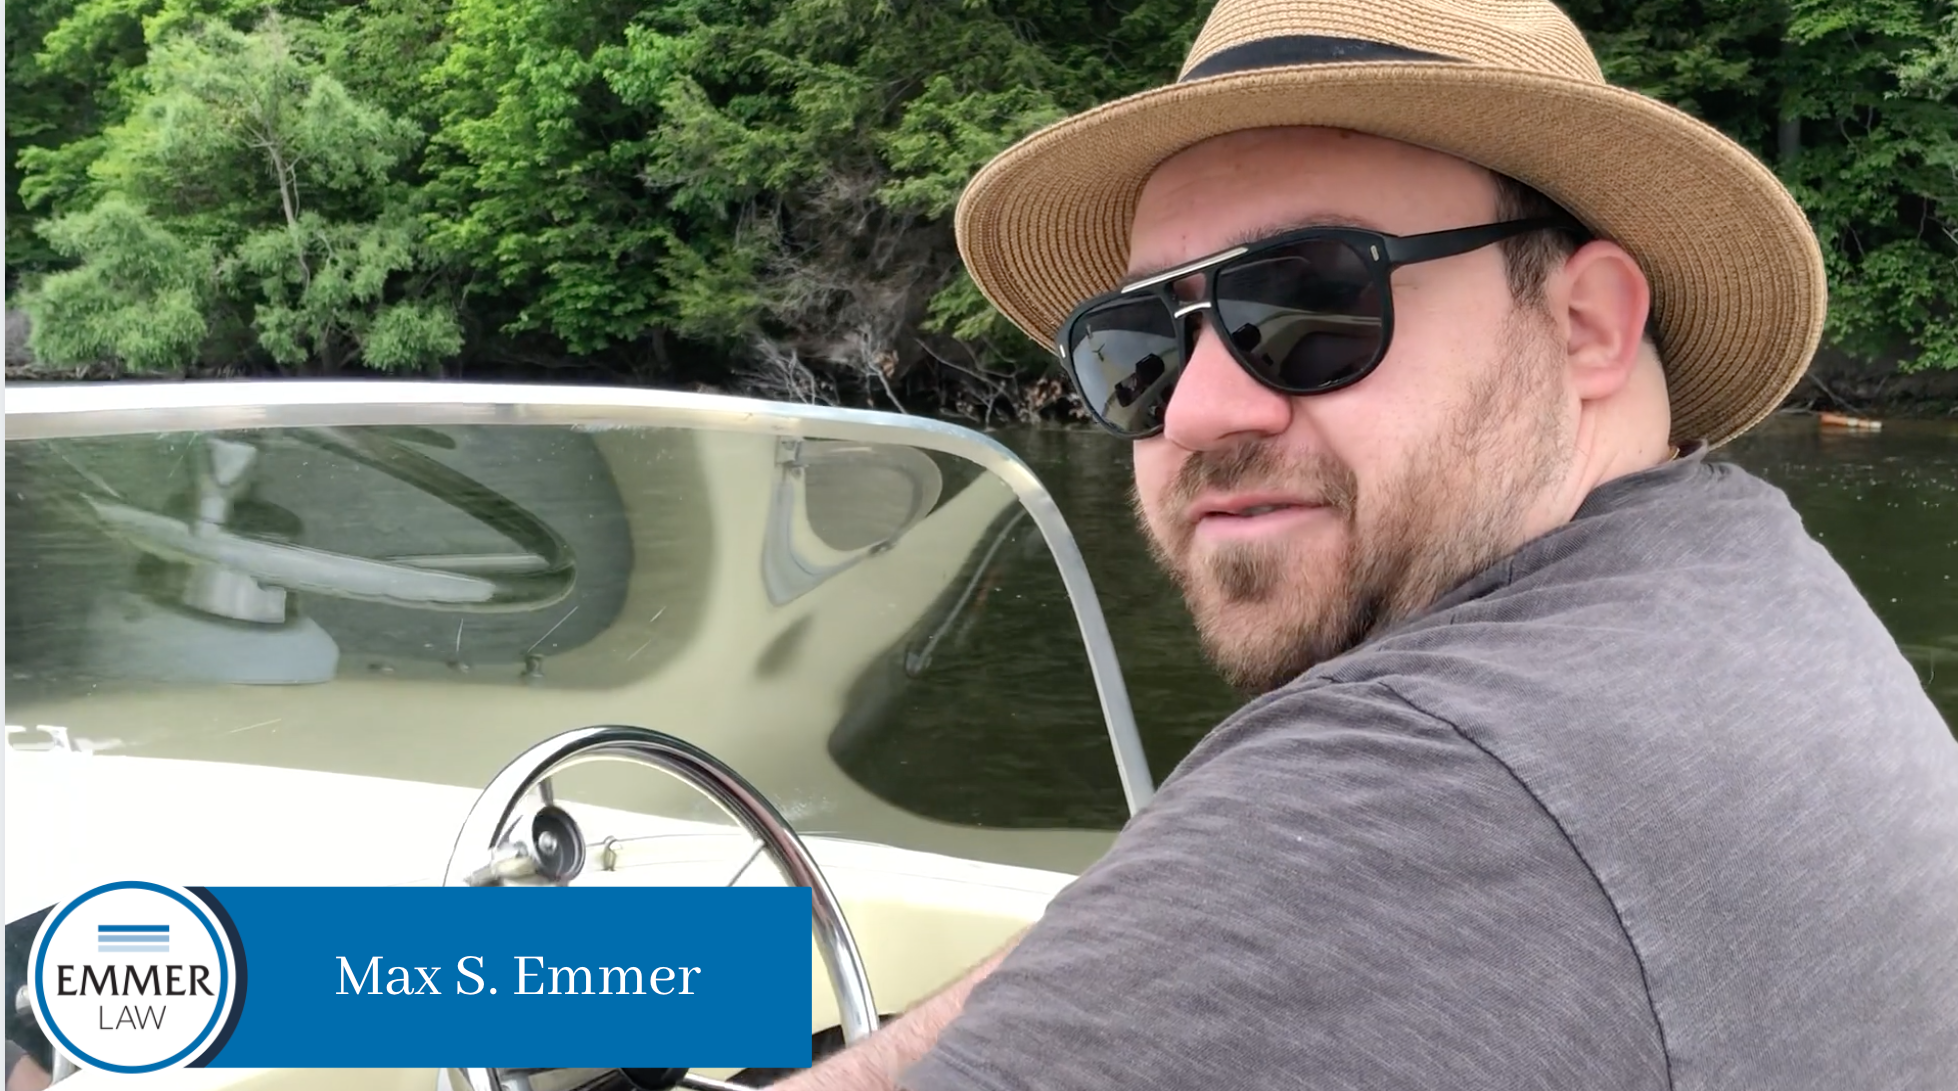 CALM WATERS WITH EMMER LAW